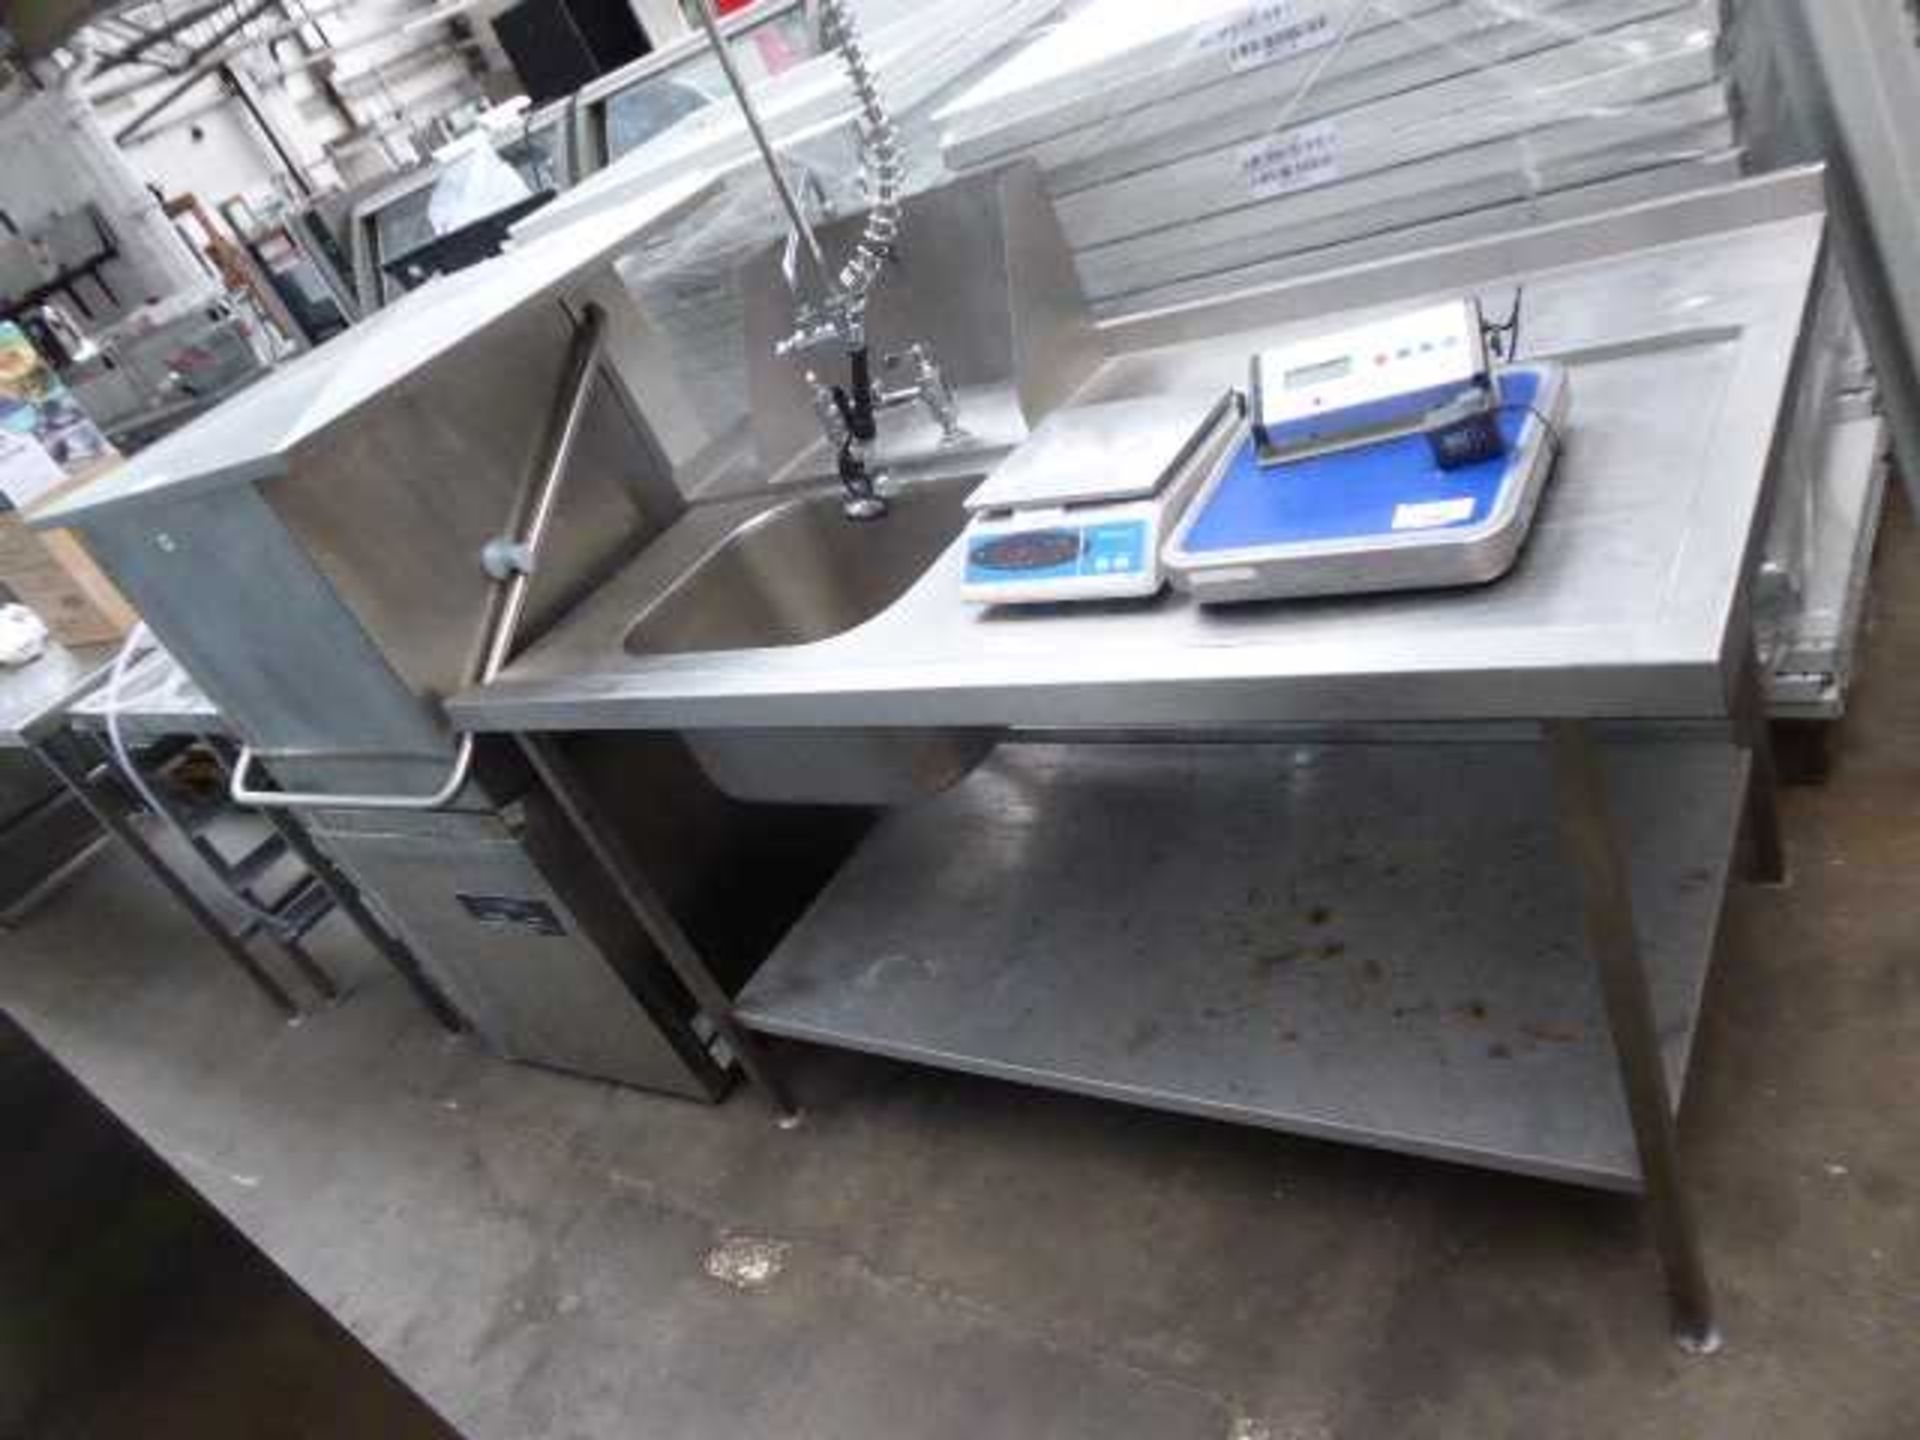 62cm Maidaid C1035WS lift top pass through dish washer with associated draining board and sink - Image 5 of 5